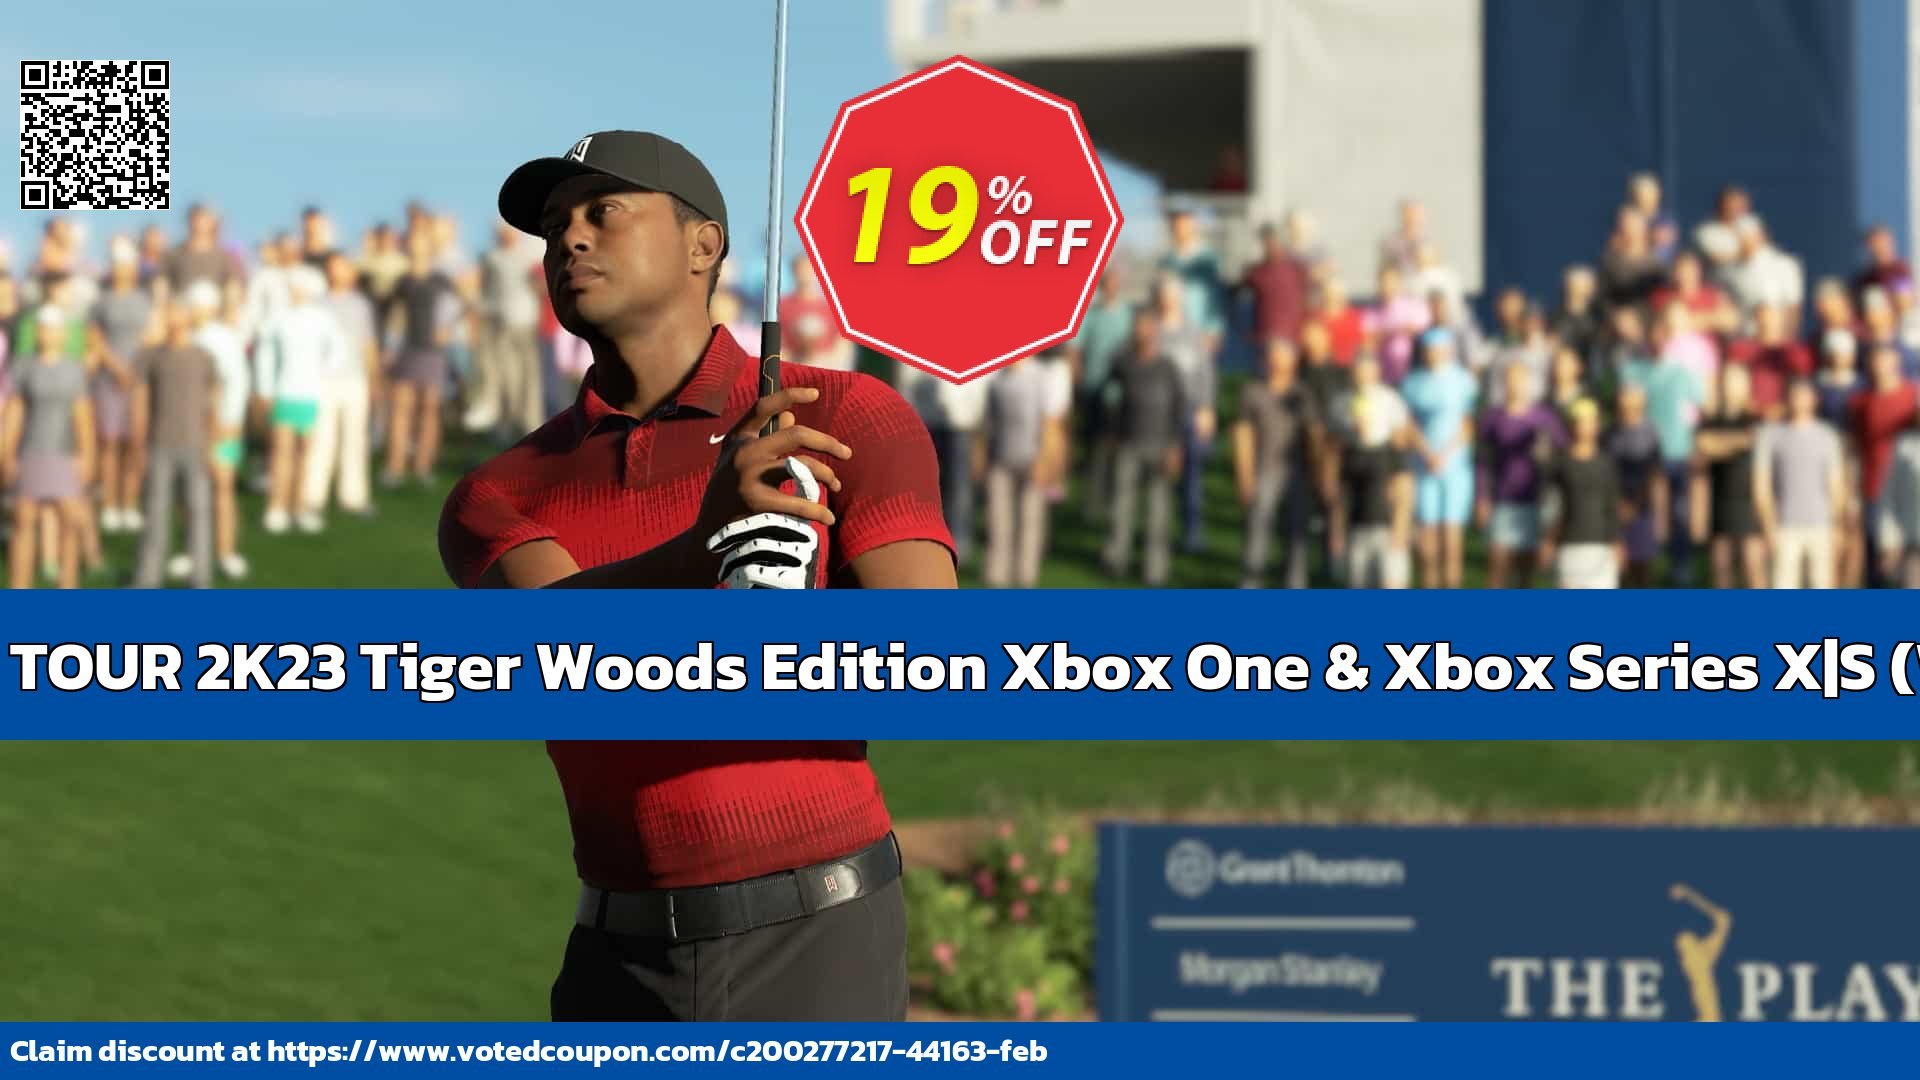 PGA TOUR 2K23 Tiger Woods Edition Xbox One & Xbox Series X|S, WW  voted-on promotion codes